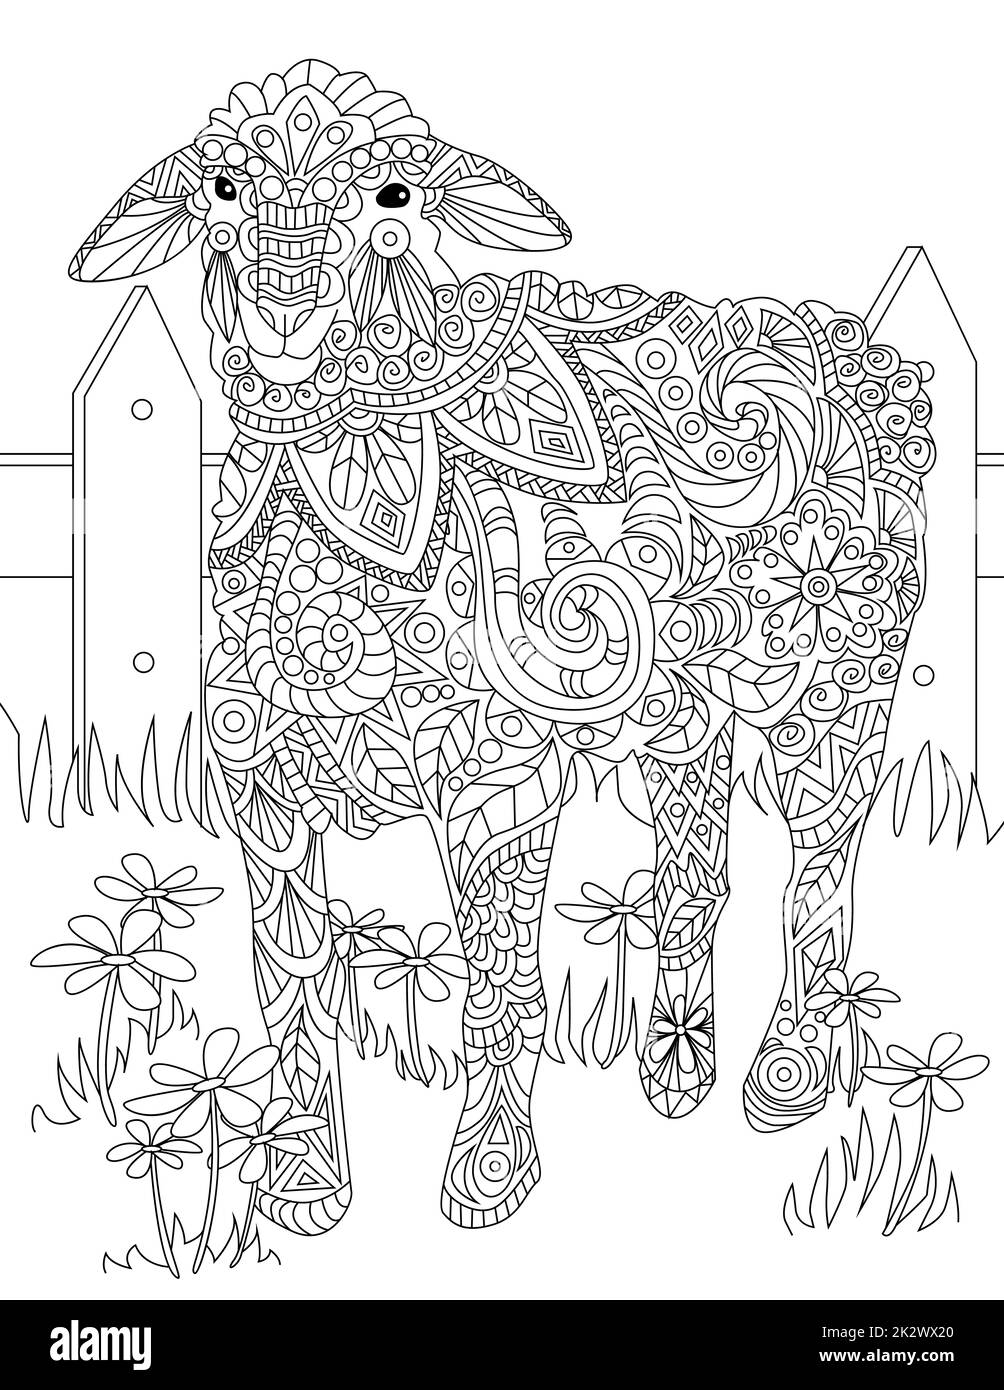 Large Drawing Of A Sheep Standing Alone Inside The Fence Waiting For Shephered. Big Lamb Line Drawing Waiting On His Own Surrounded By Wood Railings. Stock Photo